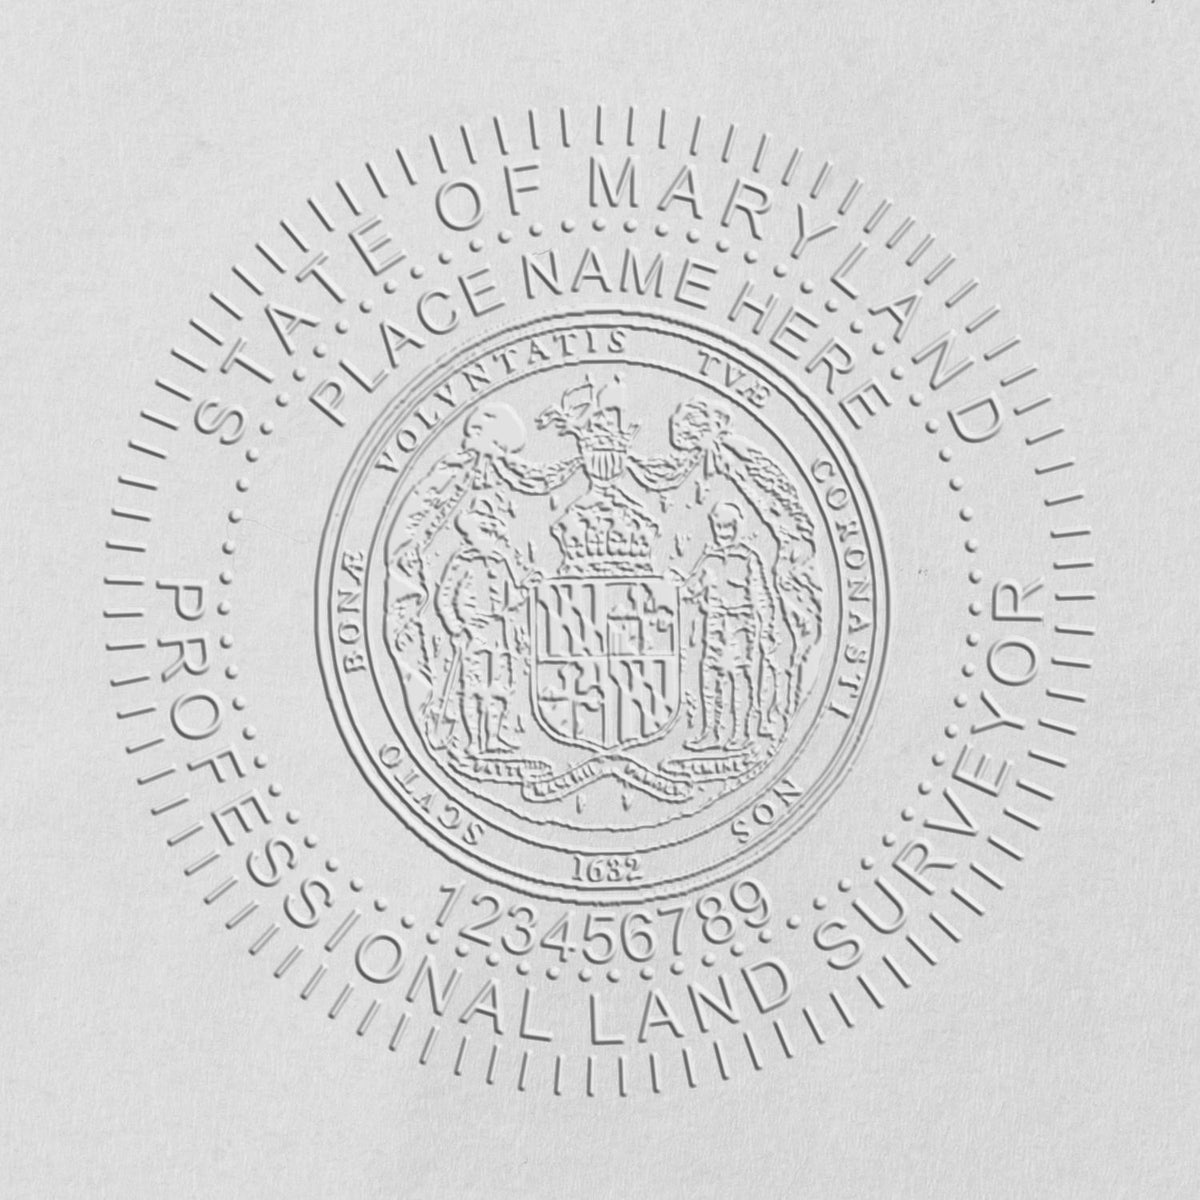 The Gift Maryland Land Surveyor Seal stamp impression comes to life with a crisp, detailed image stamped on paper - showcasing true professional quality.